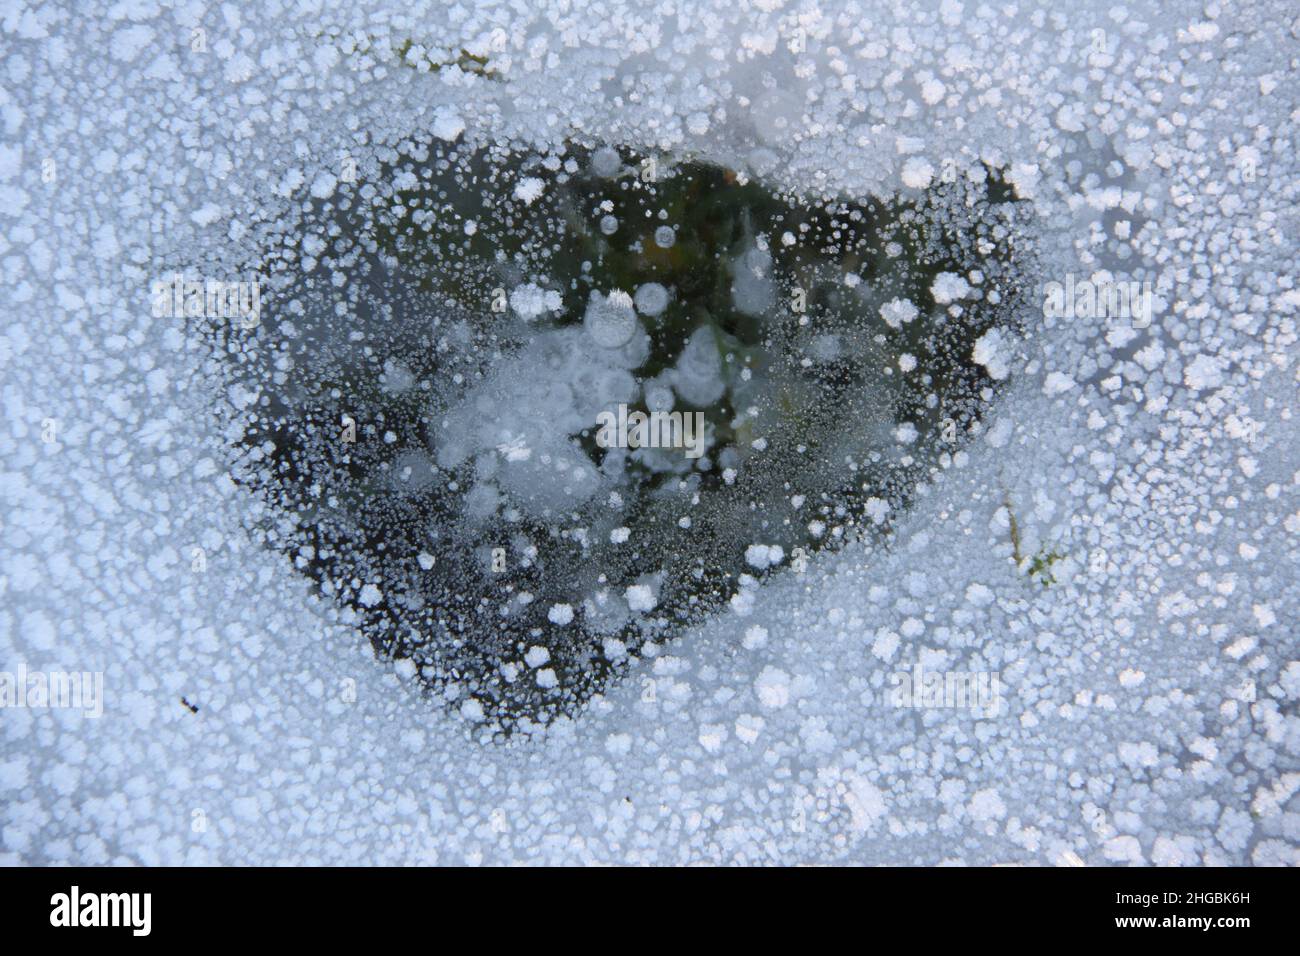 Frozen air bubbles in the ice on a frozen ditch. Stock Photo